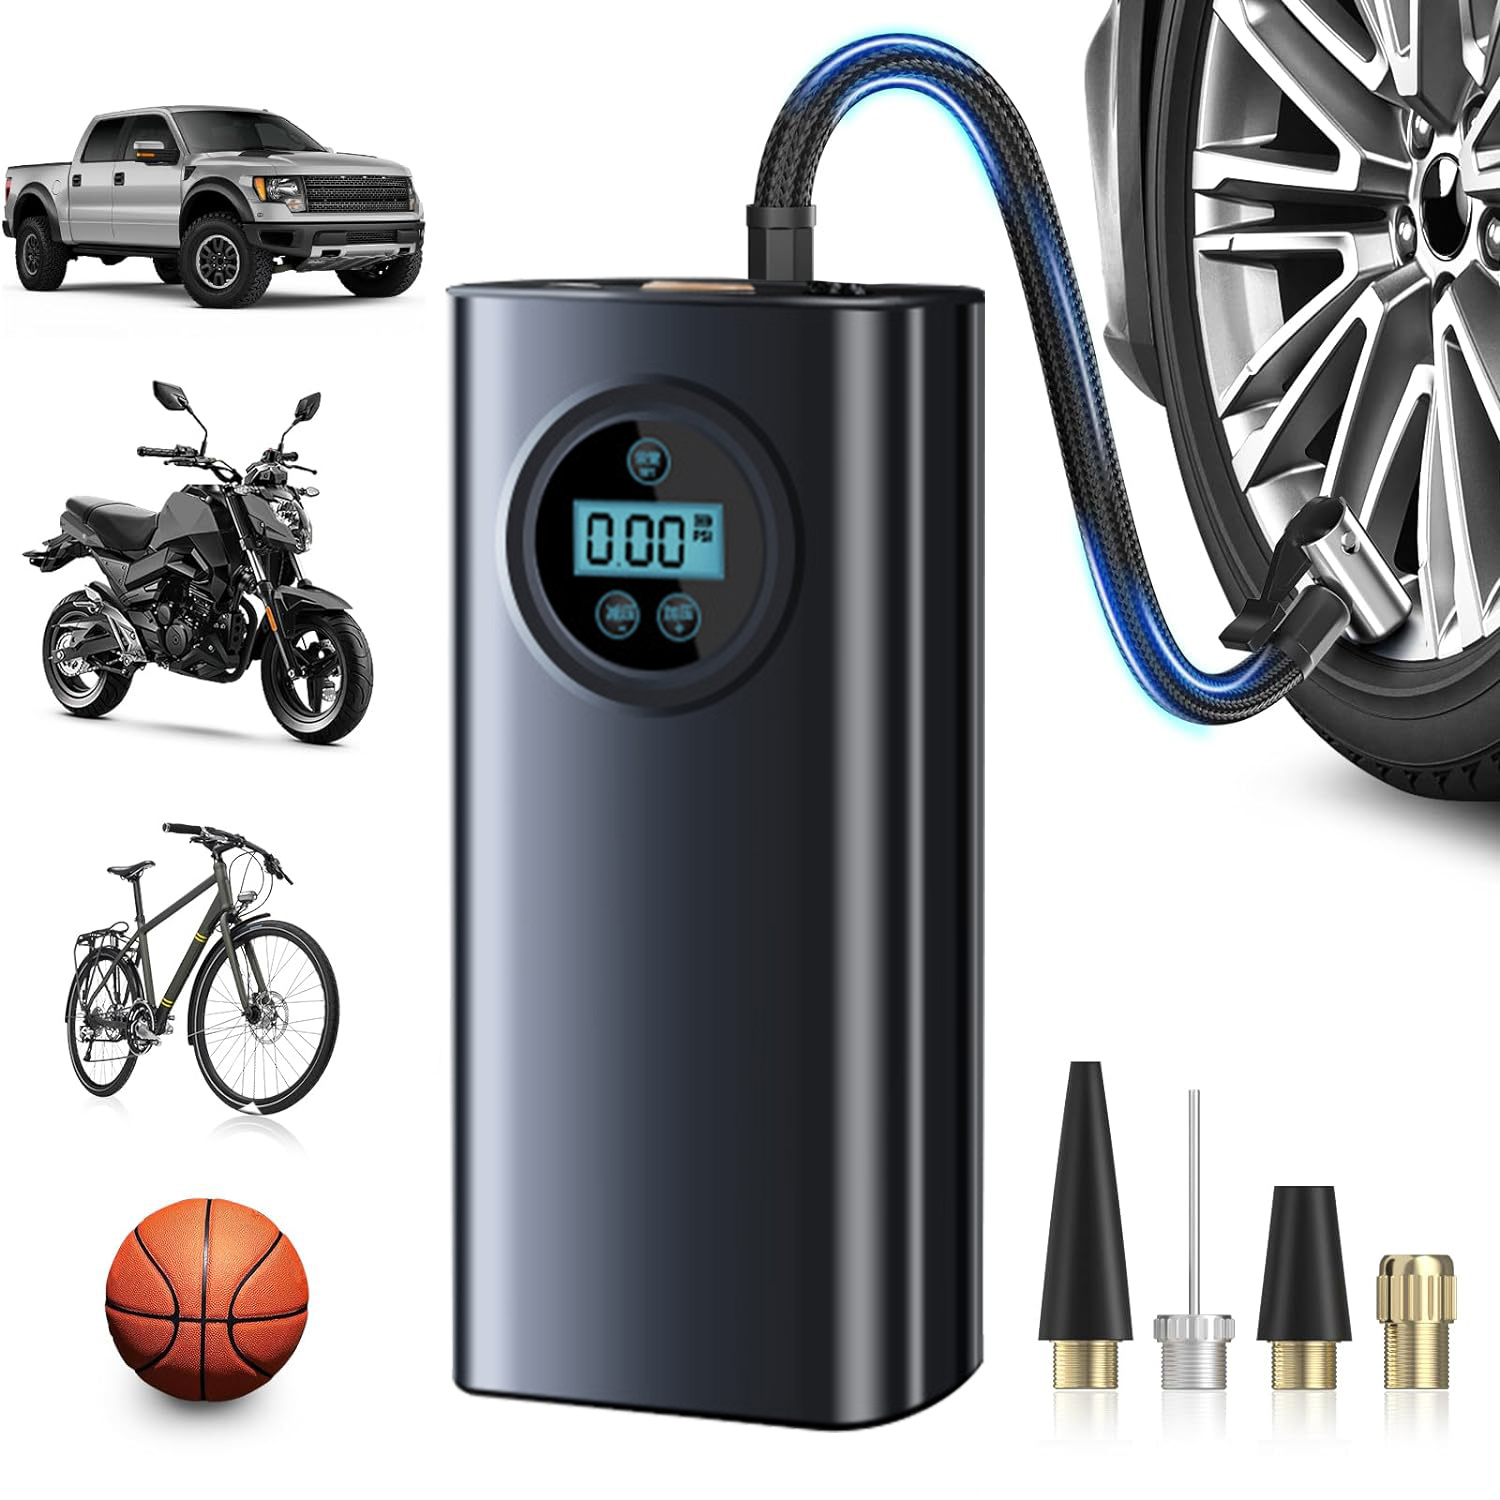 

Portable Compressor Tire Inflator With Lcd Display, With 3 Nozzle Adapters,inflator For Car Tires, Motorcycle, Bike, Basketball, Other Types Of Inflatables